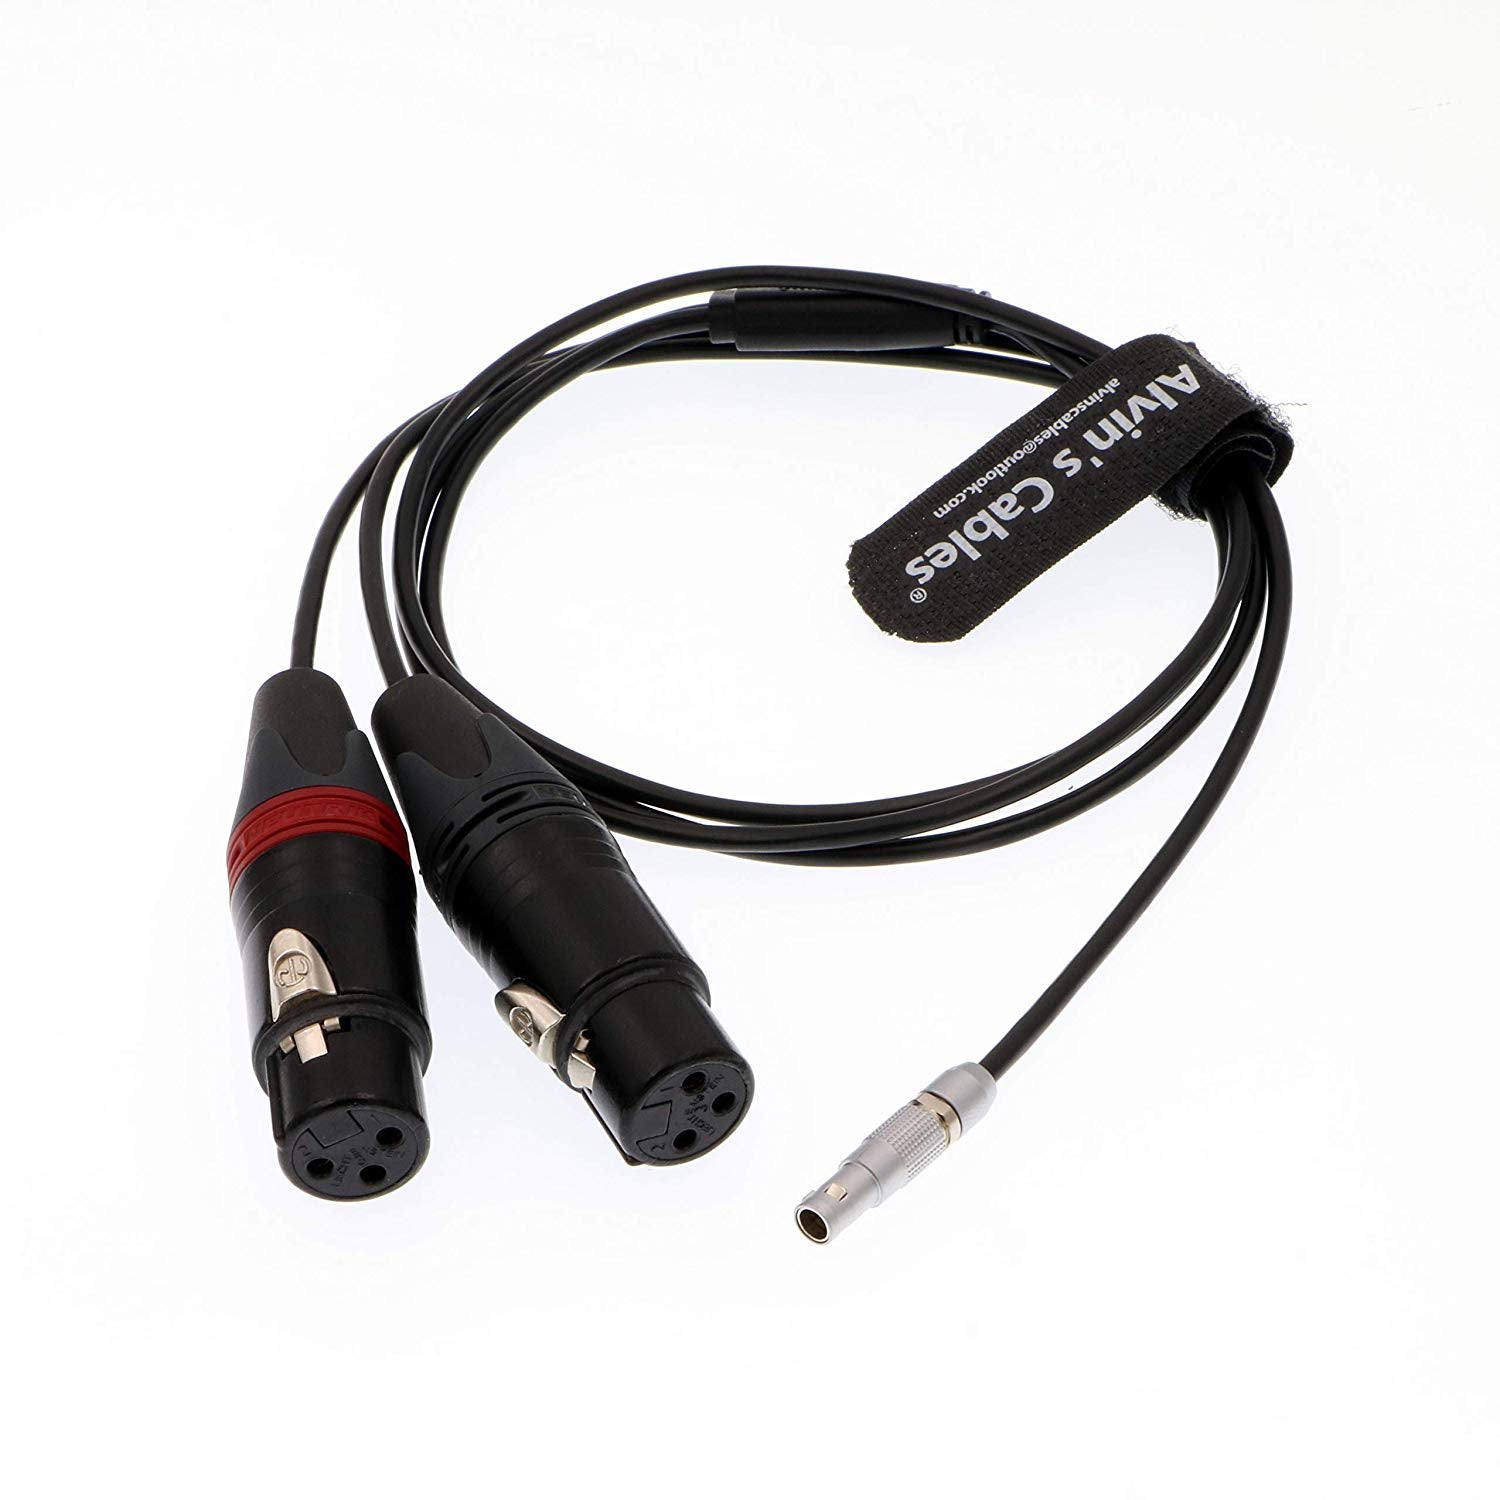 Alvin's Cables Dual XLR 3 Pin Female to 5 Pin Male Audio Input Cable for Arri Alexa Mini